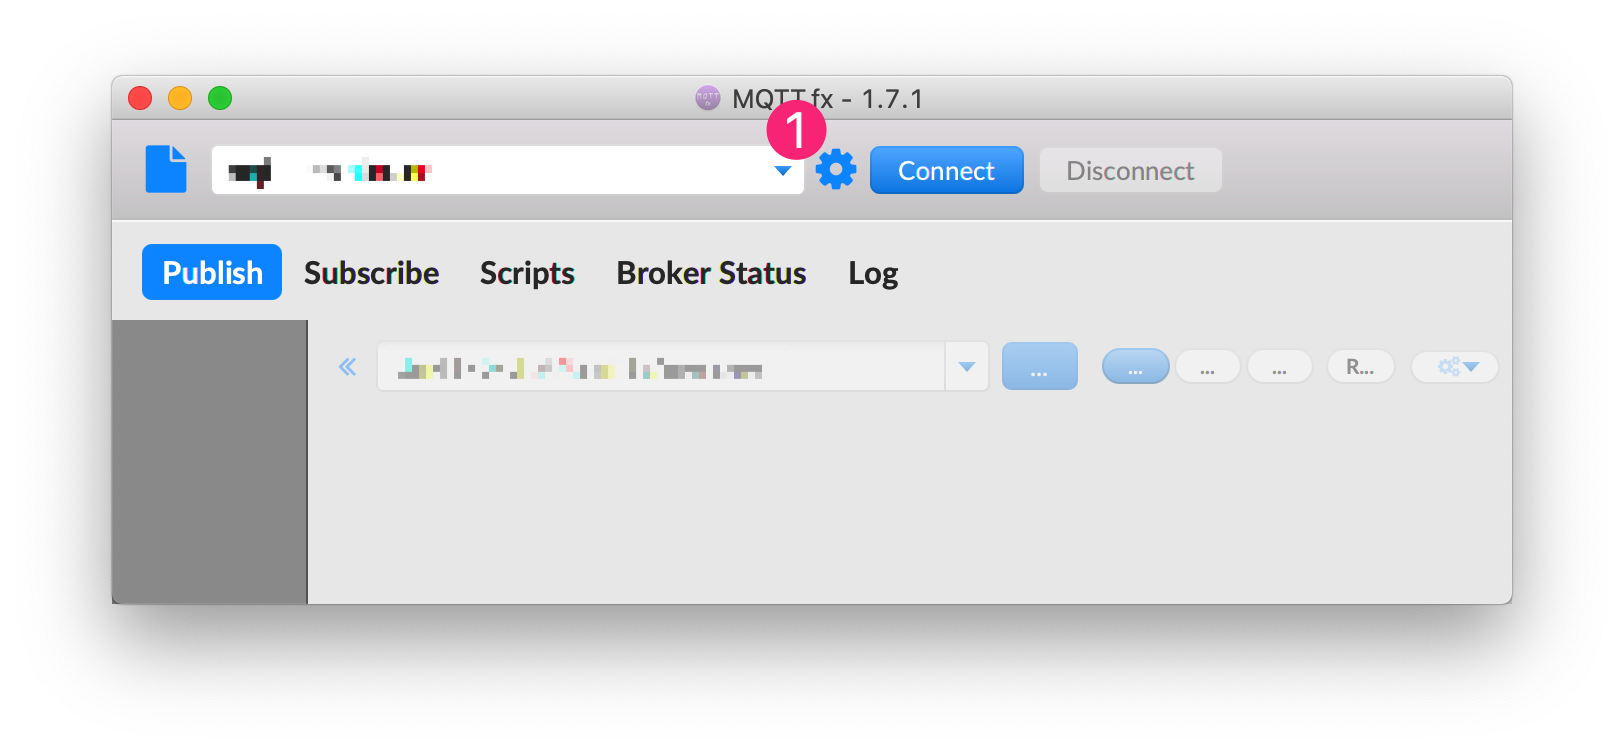 Open the broker configurations and add our MQTT broker.